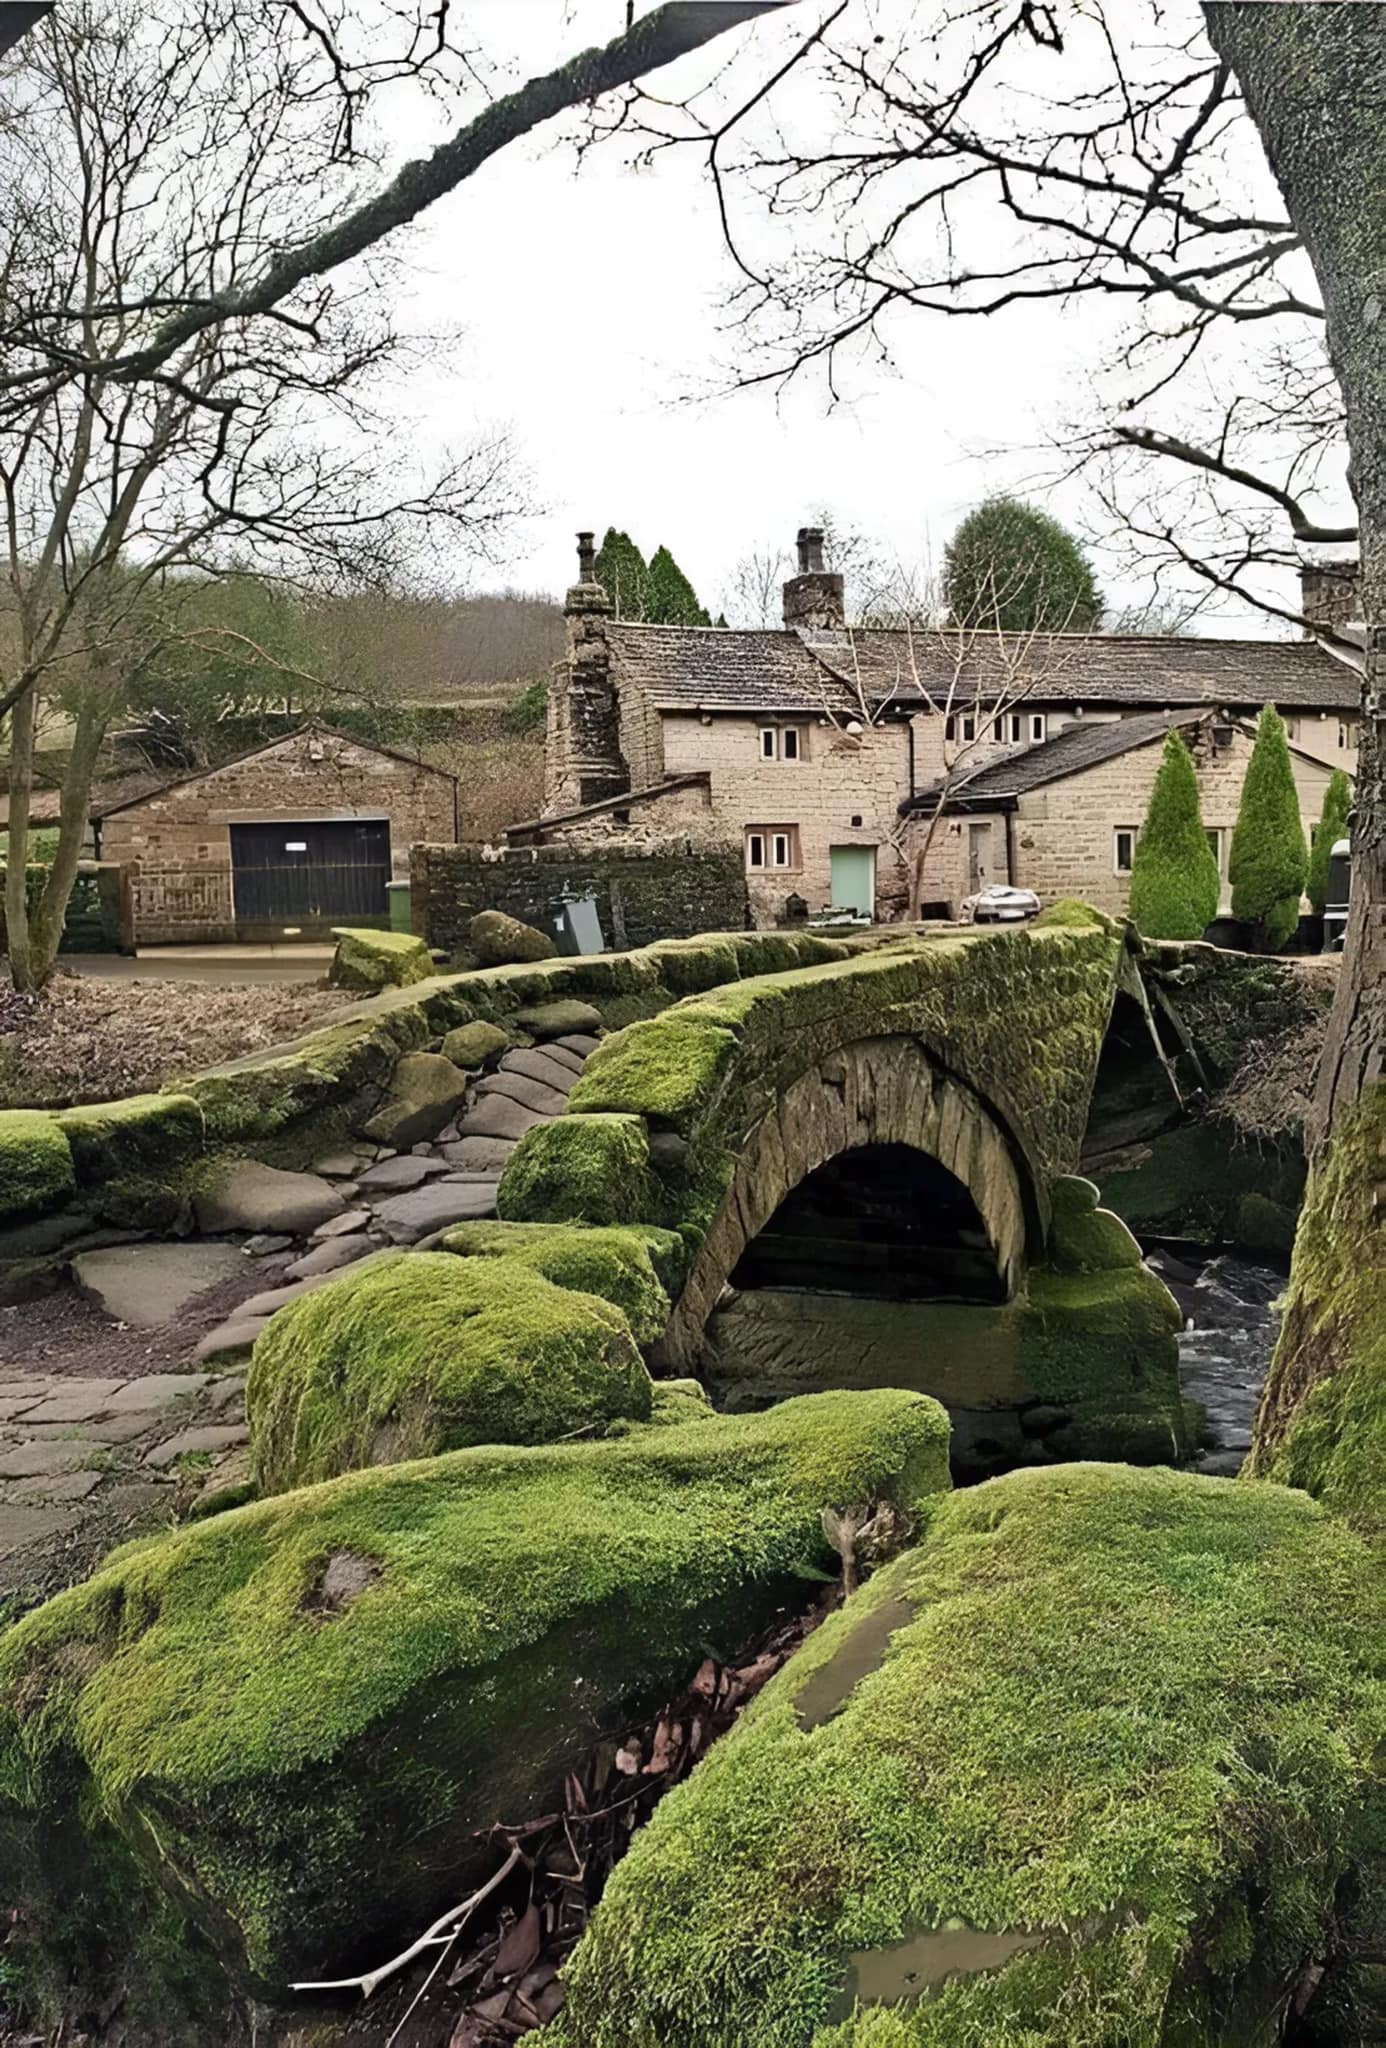 Discovering Lancashire's Remarkable 800-Year-Old Bridge